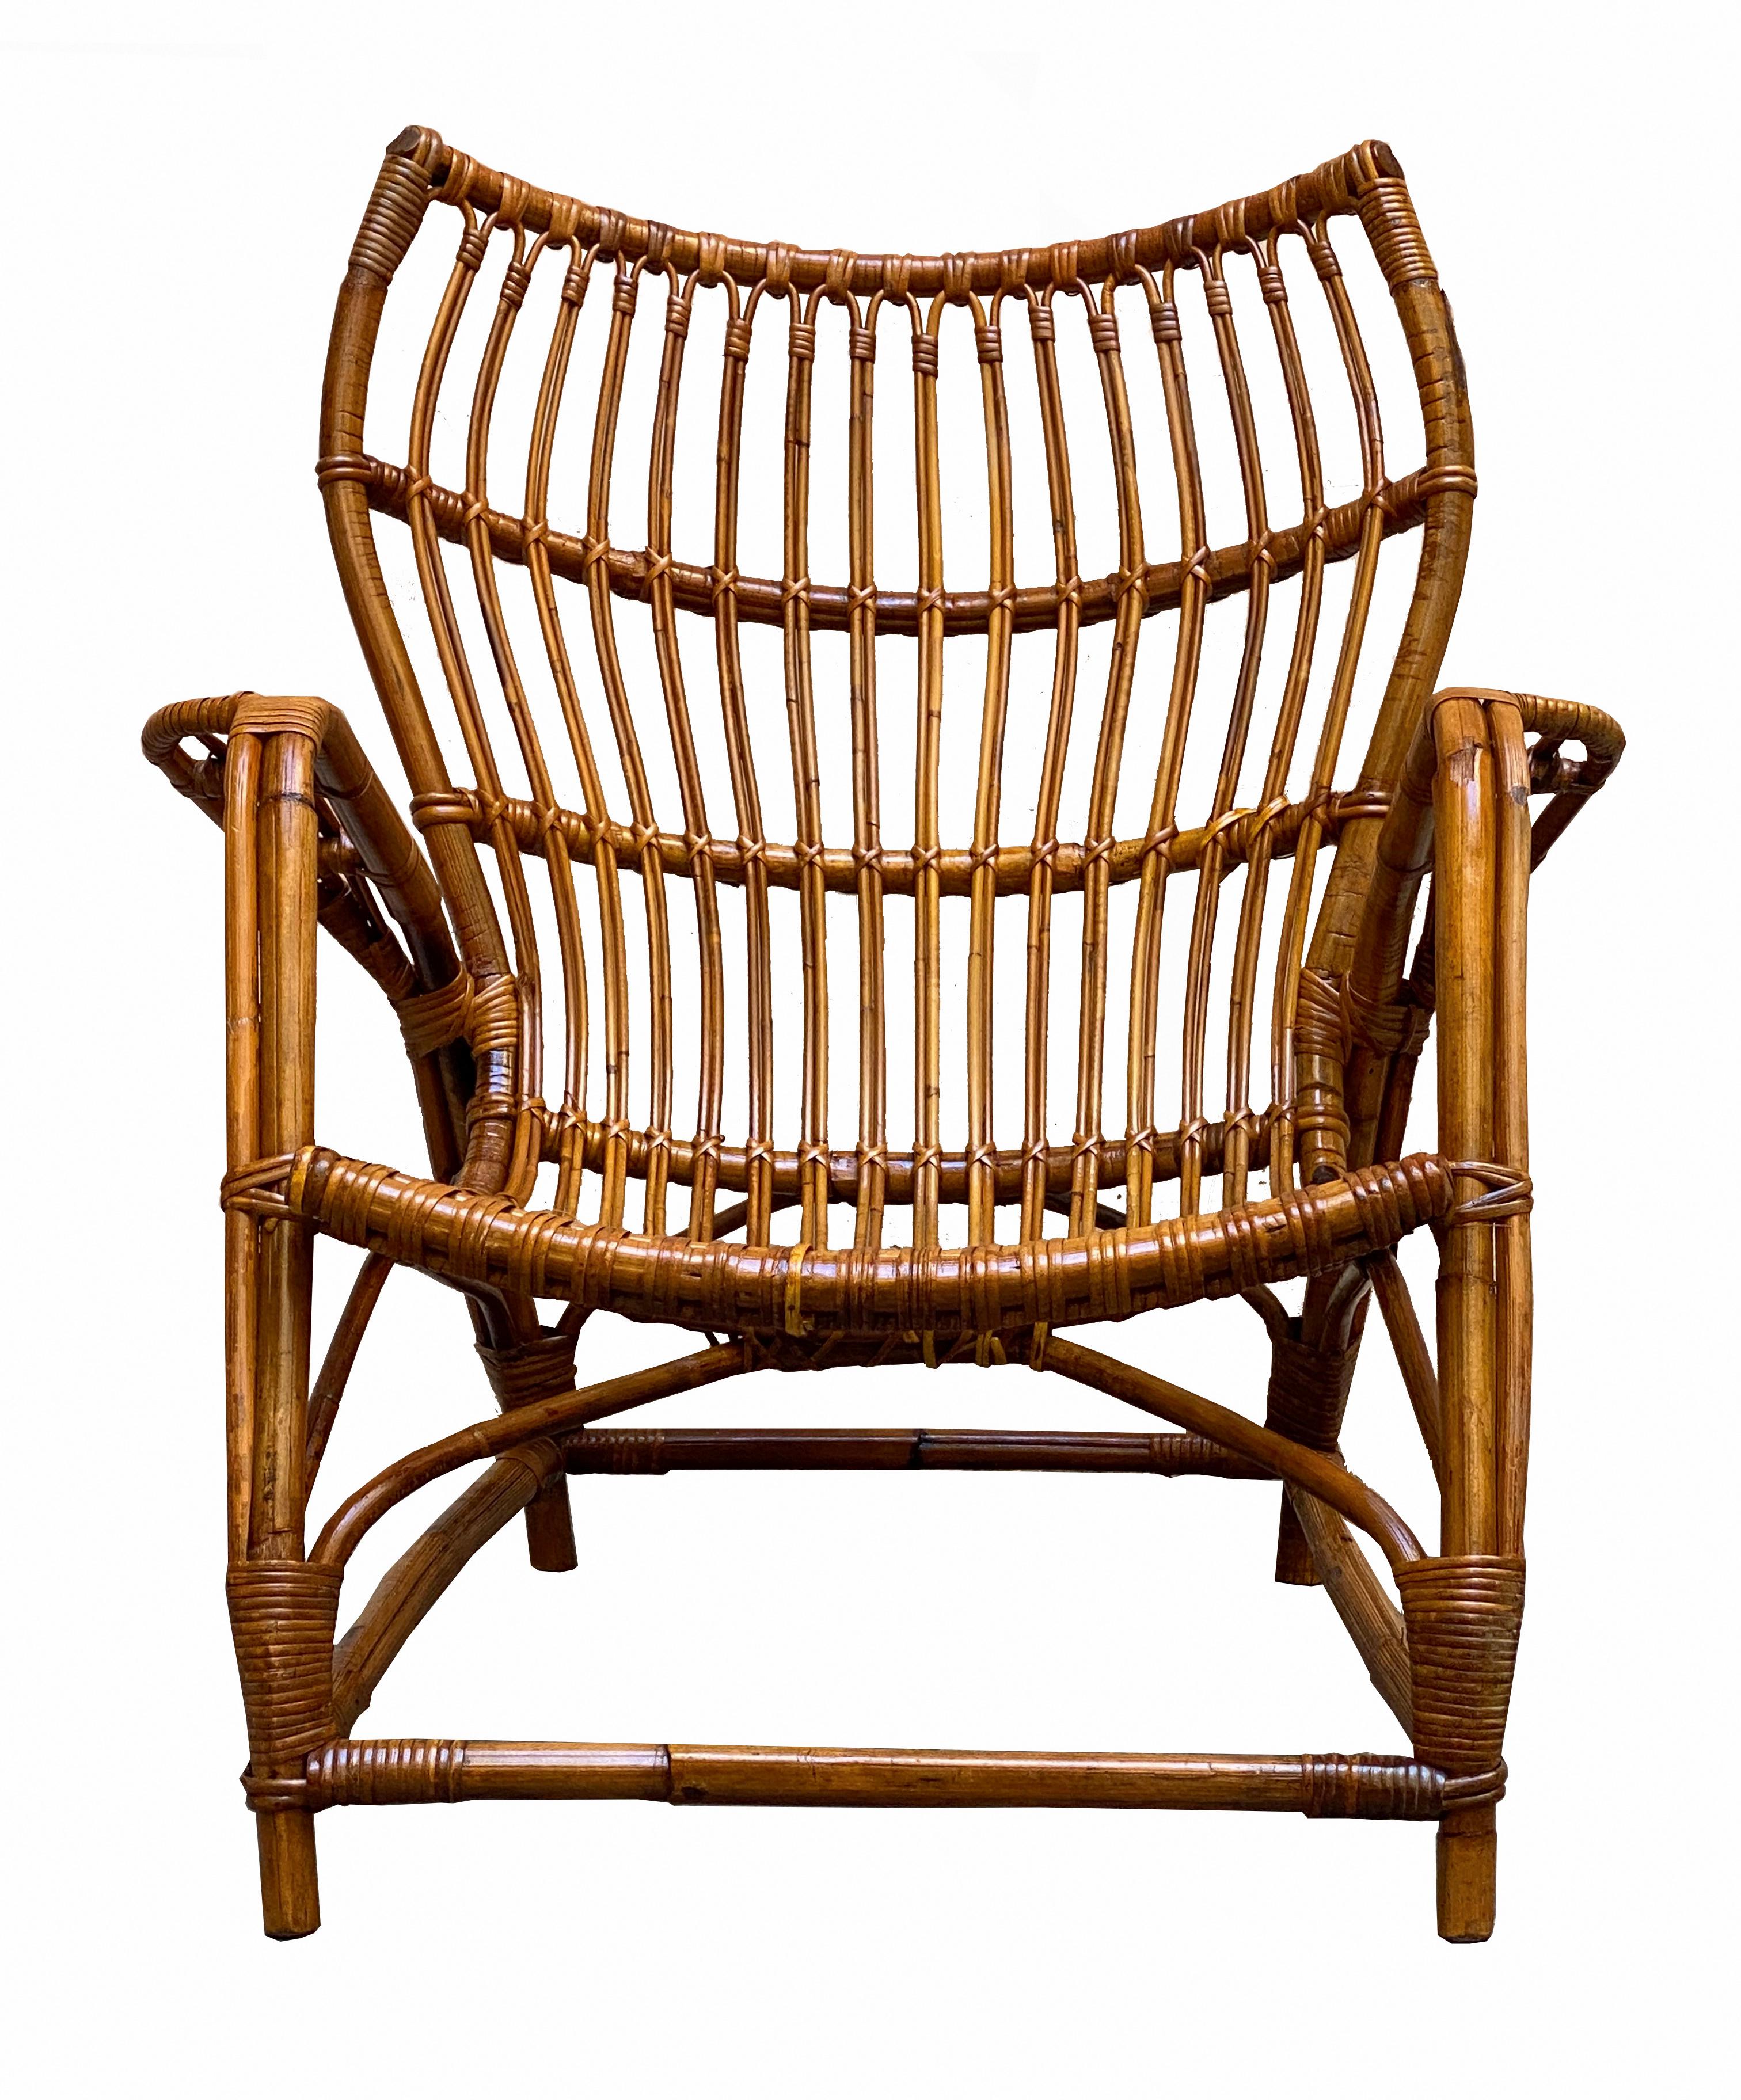 Italian-made armchair produced in the 1960s. Bent bamboo and woven rattan frame. Good overall condition, some marks due to normal use over time.